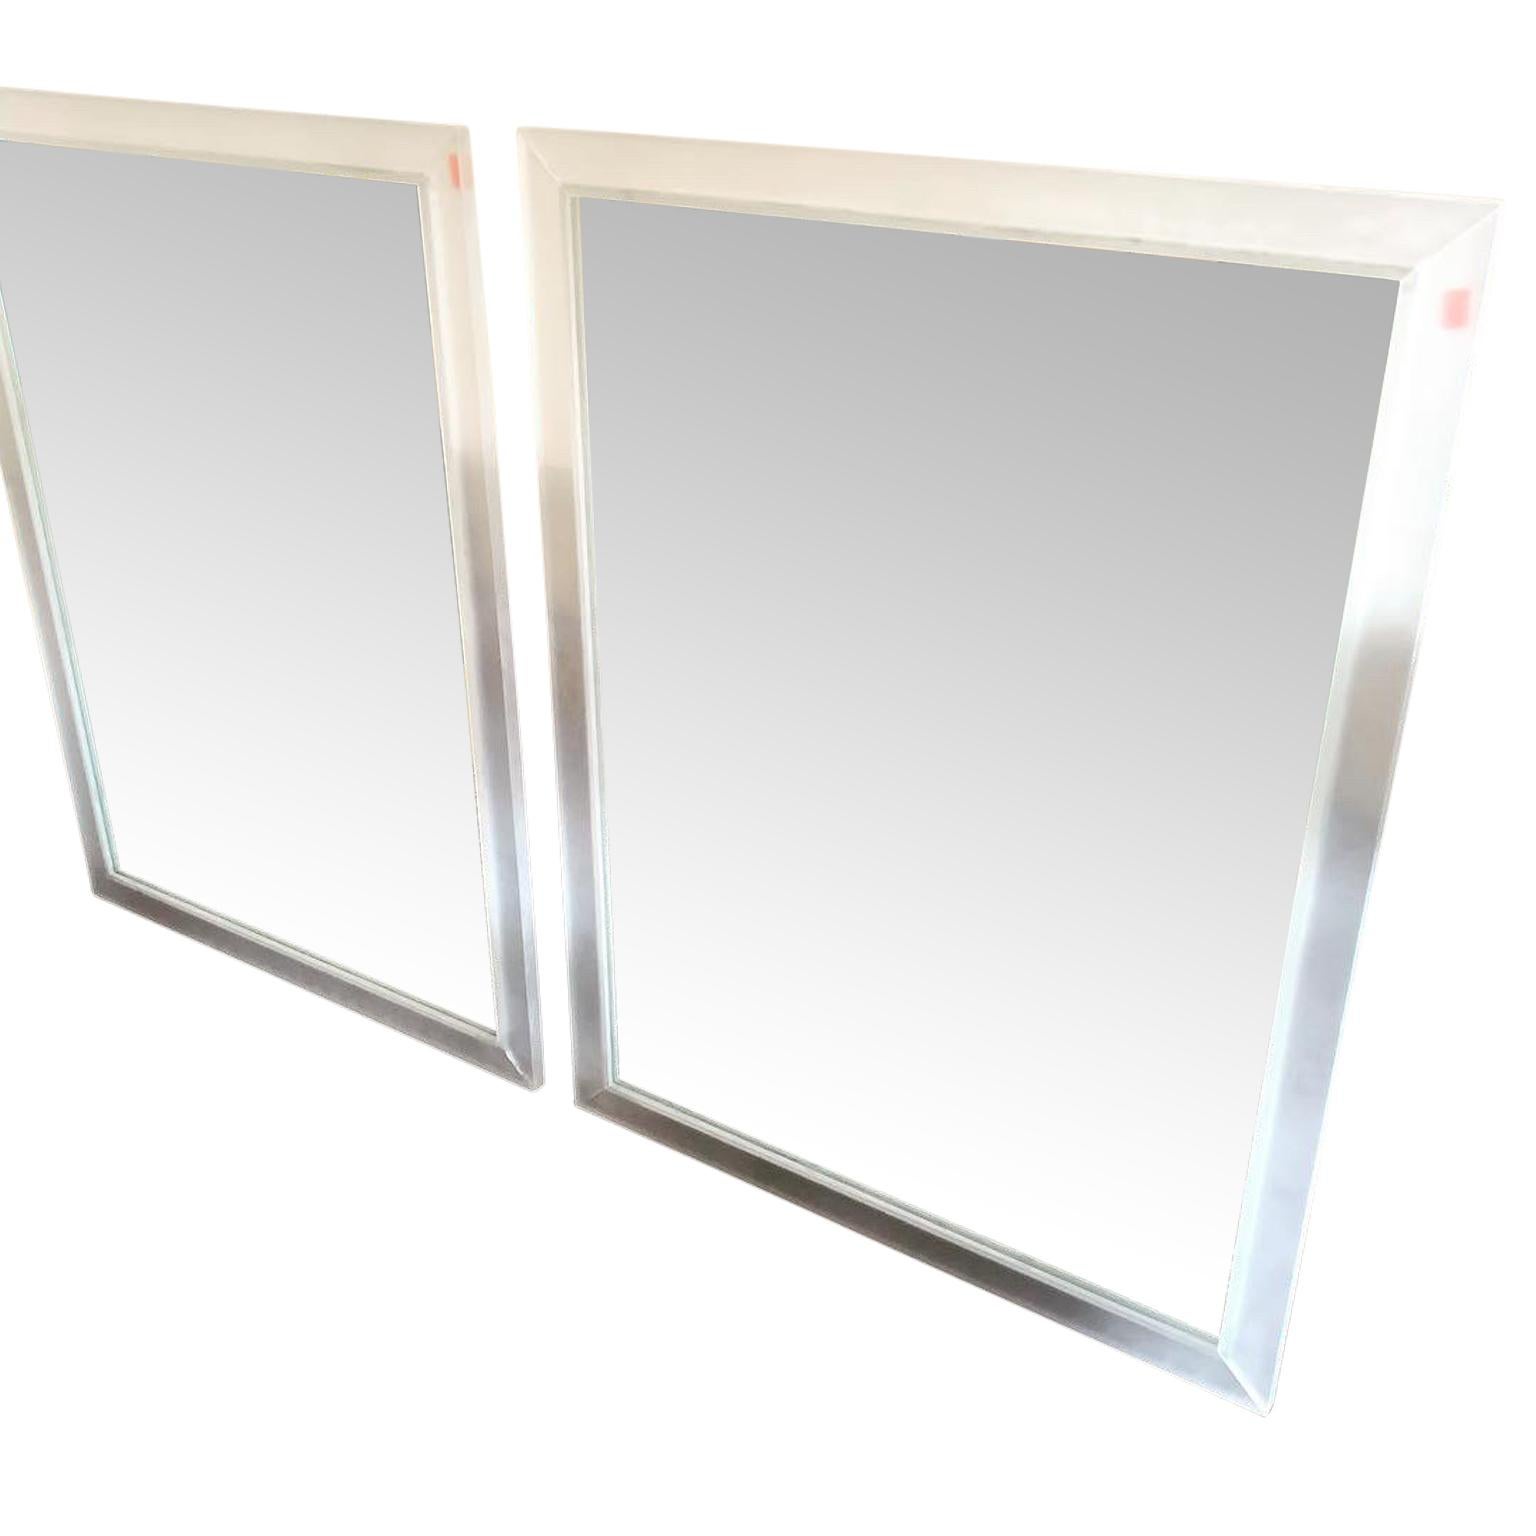 Set of Two Rectangular Vintage Frosted Translucent Lucite Wall Mirrors 11